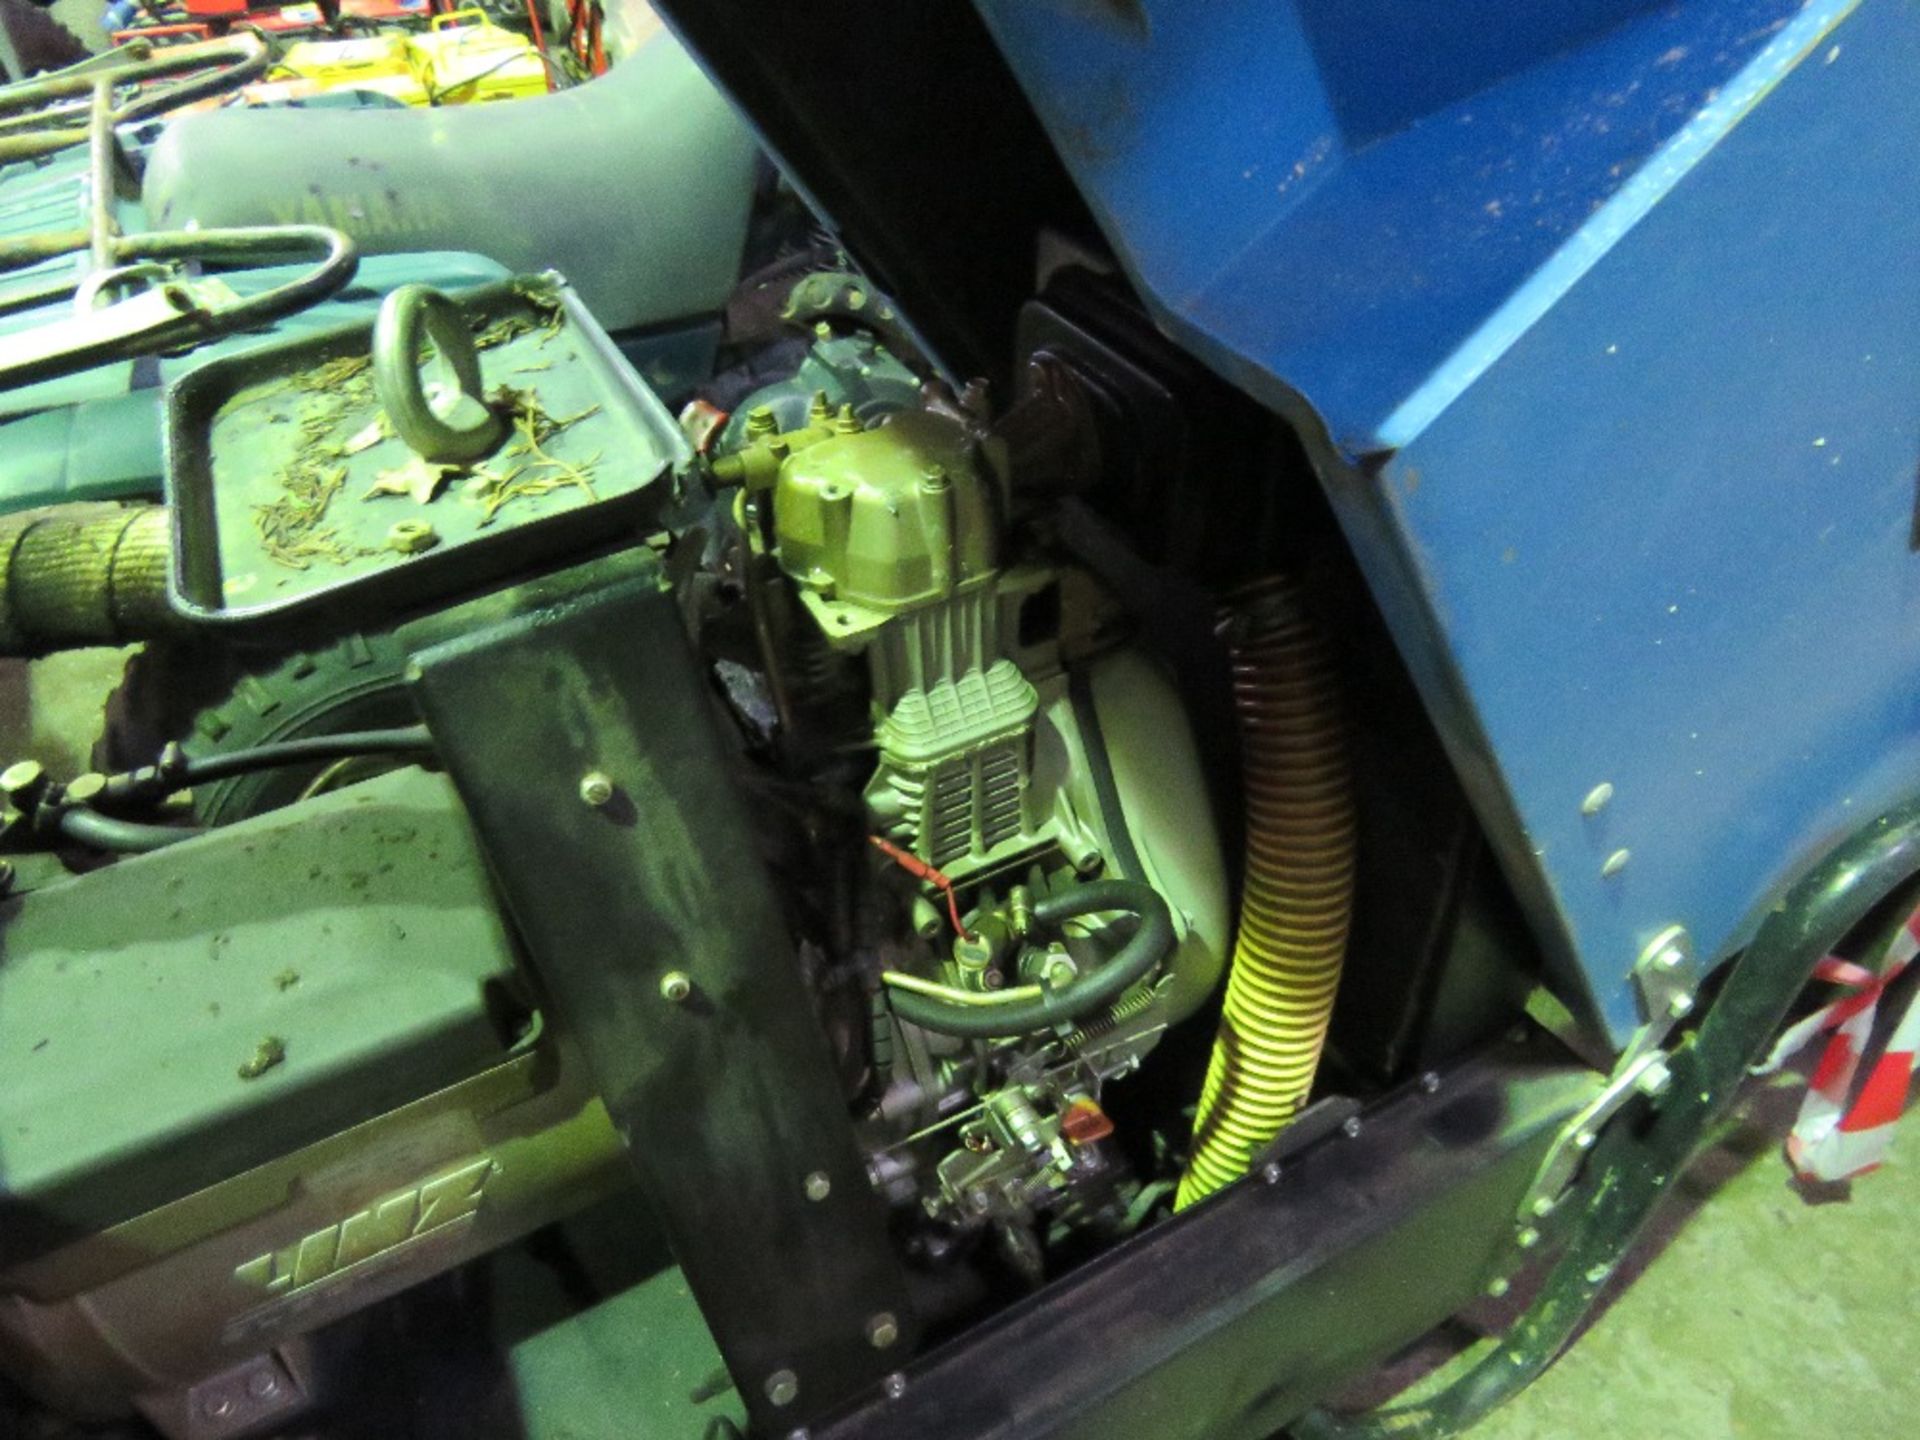 Genset MG 6SSY 6Kva barrow generator WHEN TESTED WAS SEEN TO RUN AND SHOWED POWER - Image 3 of 3